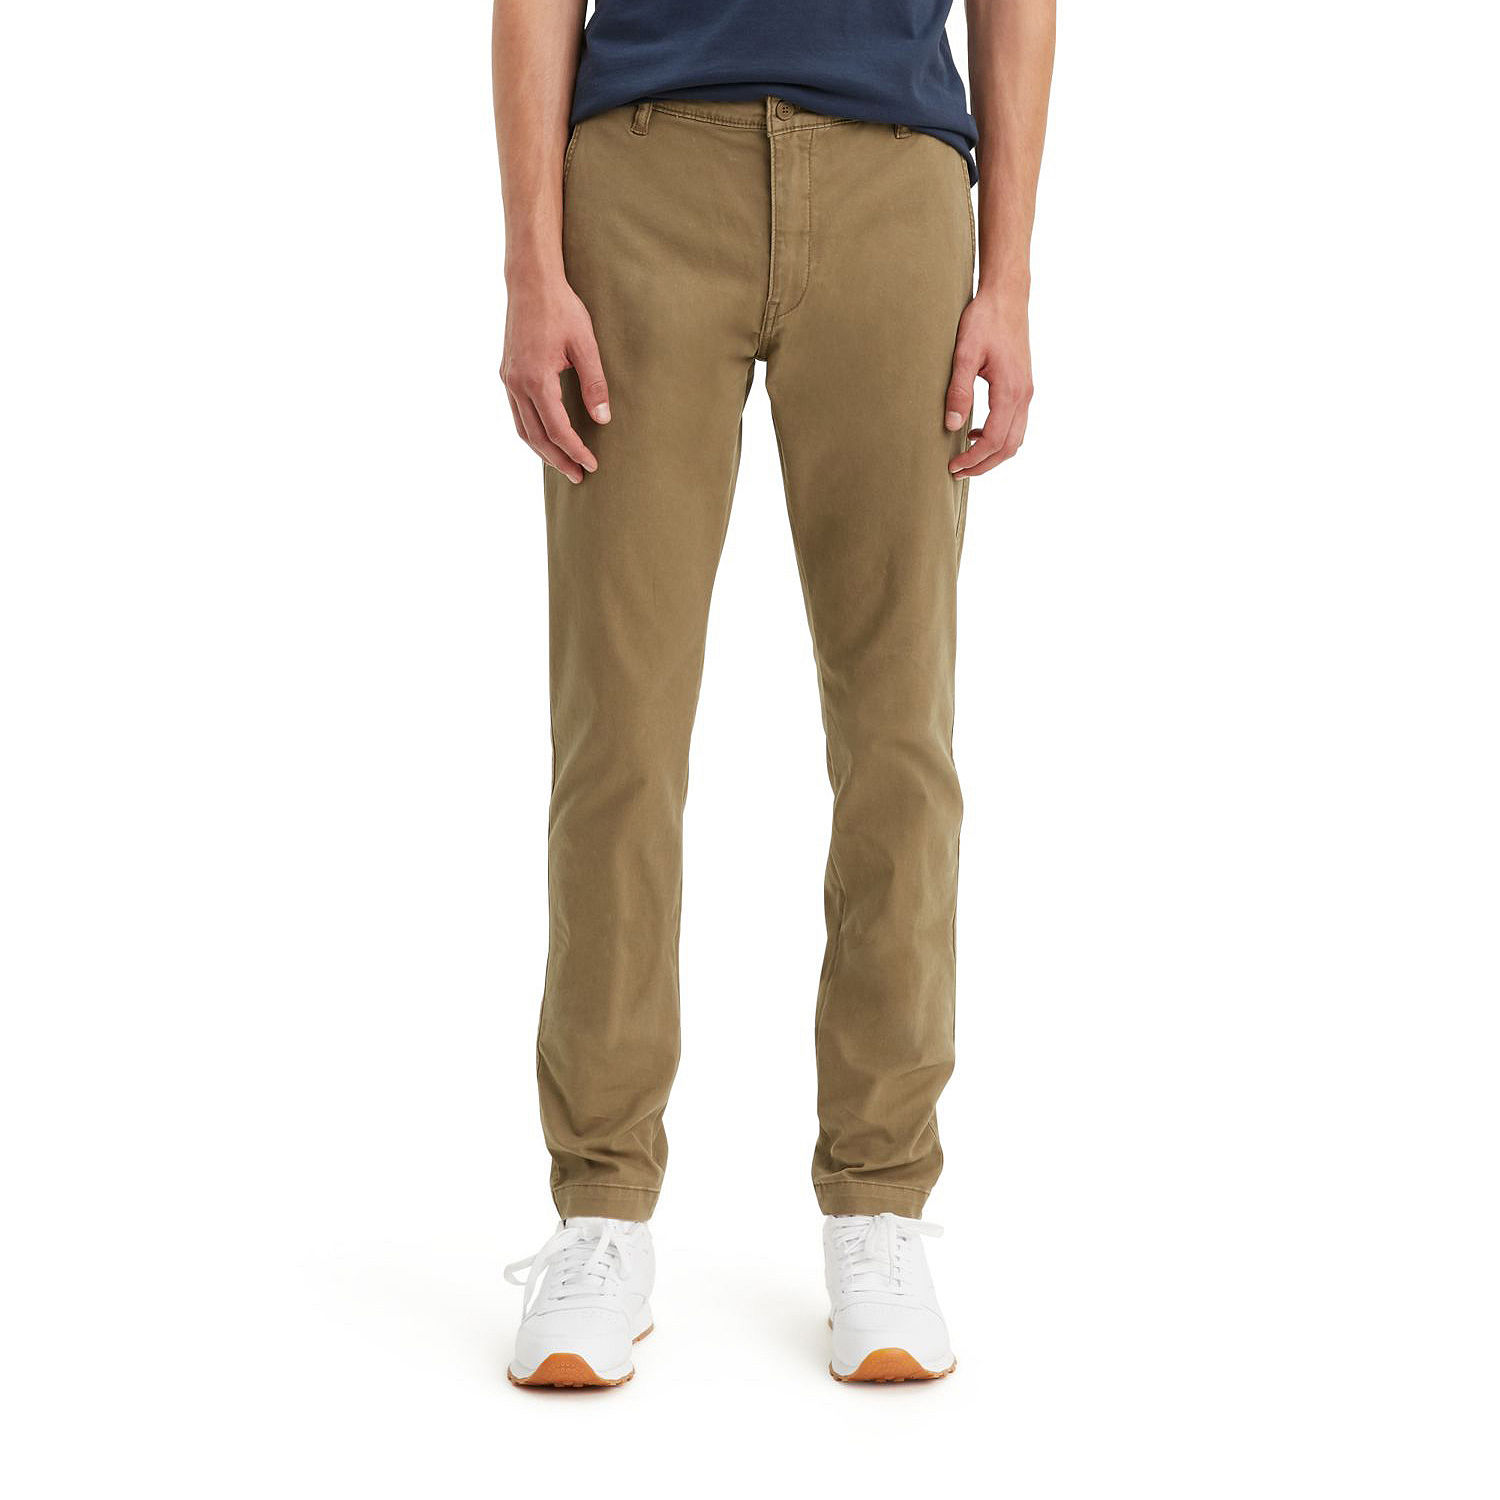 Levi's® Mens XX Chino Taper Fit Pants - JCPenney